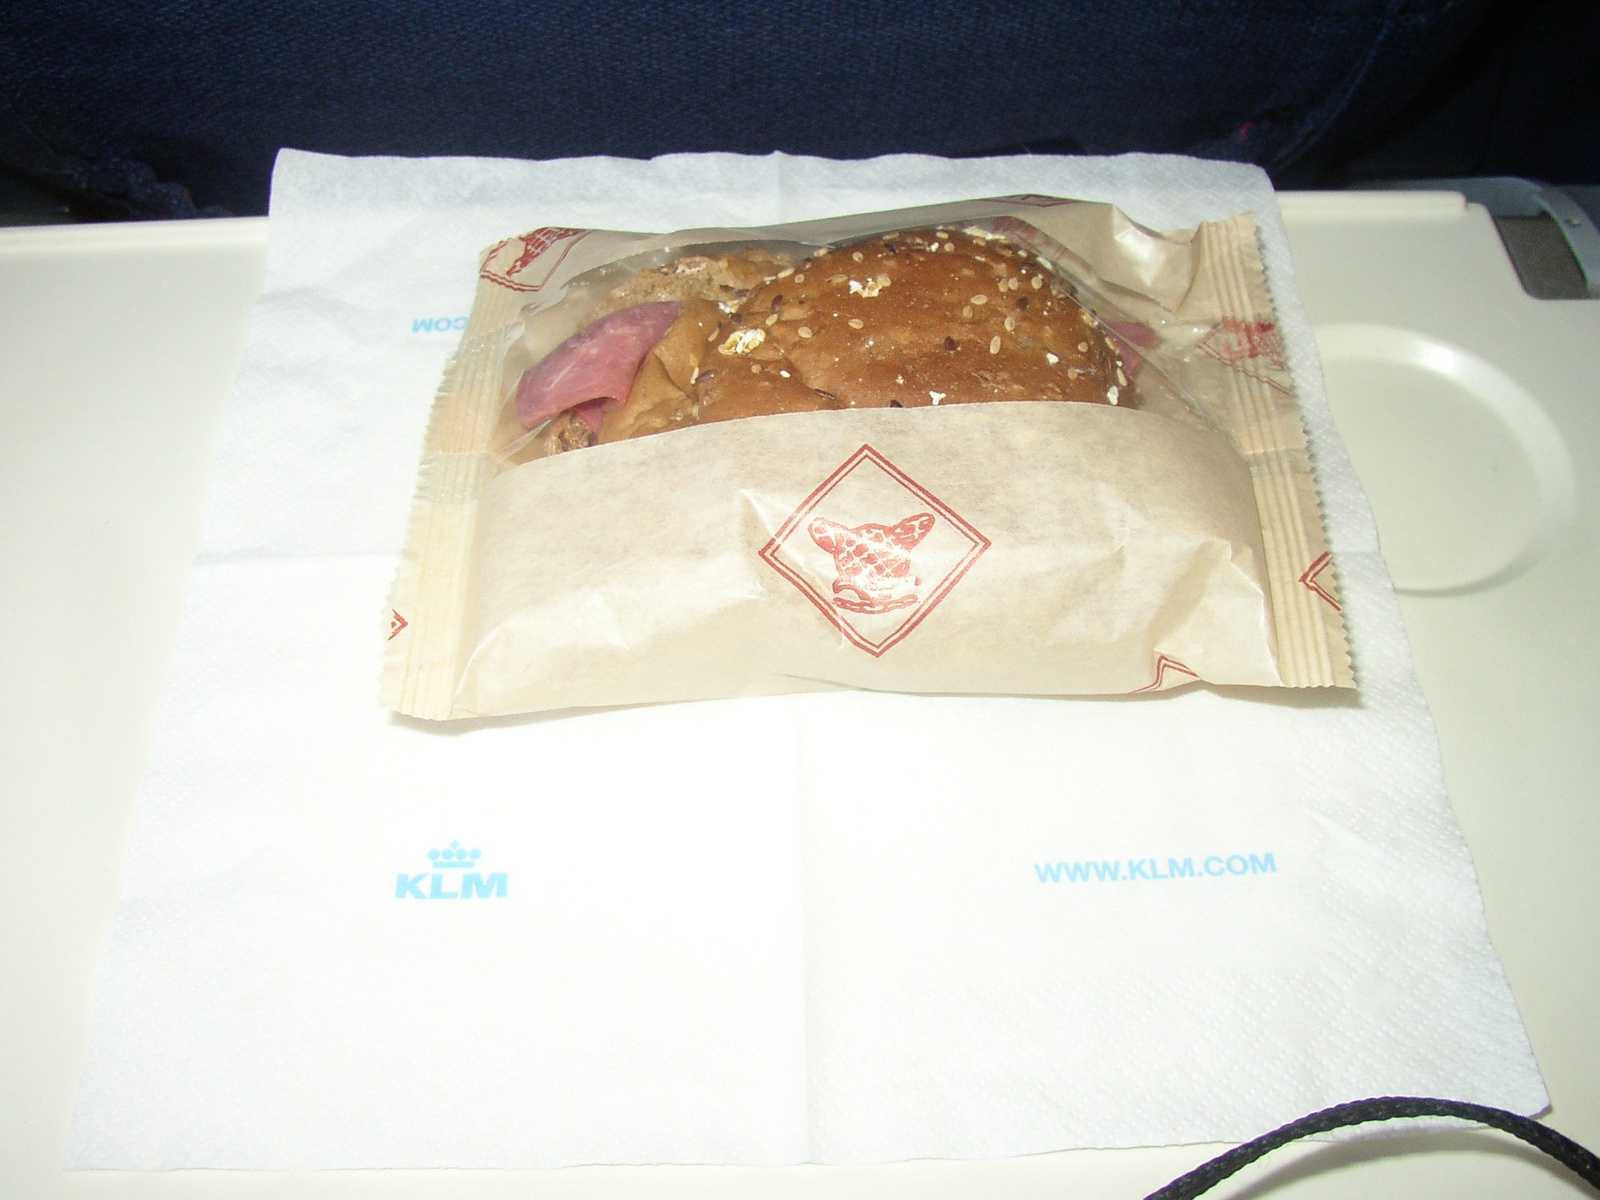 klm catering